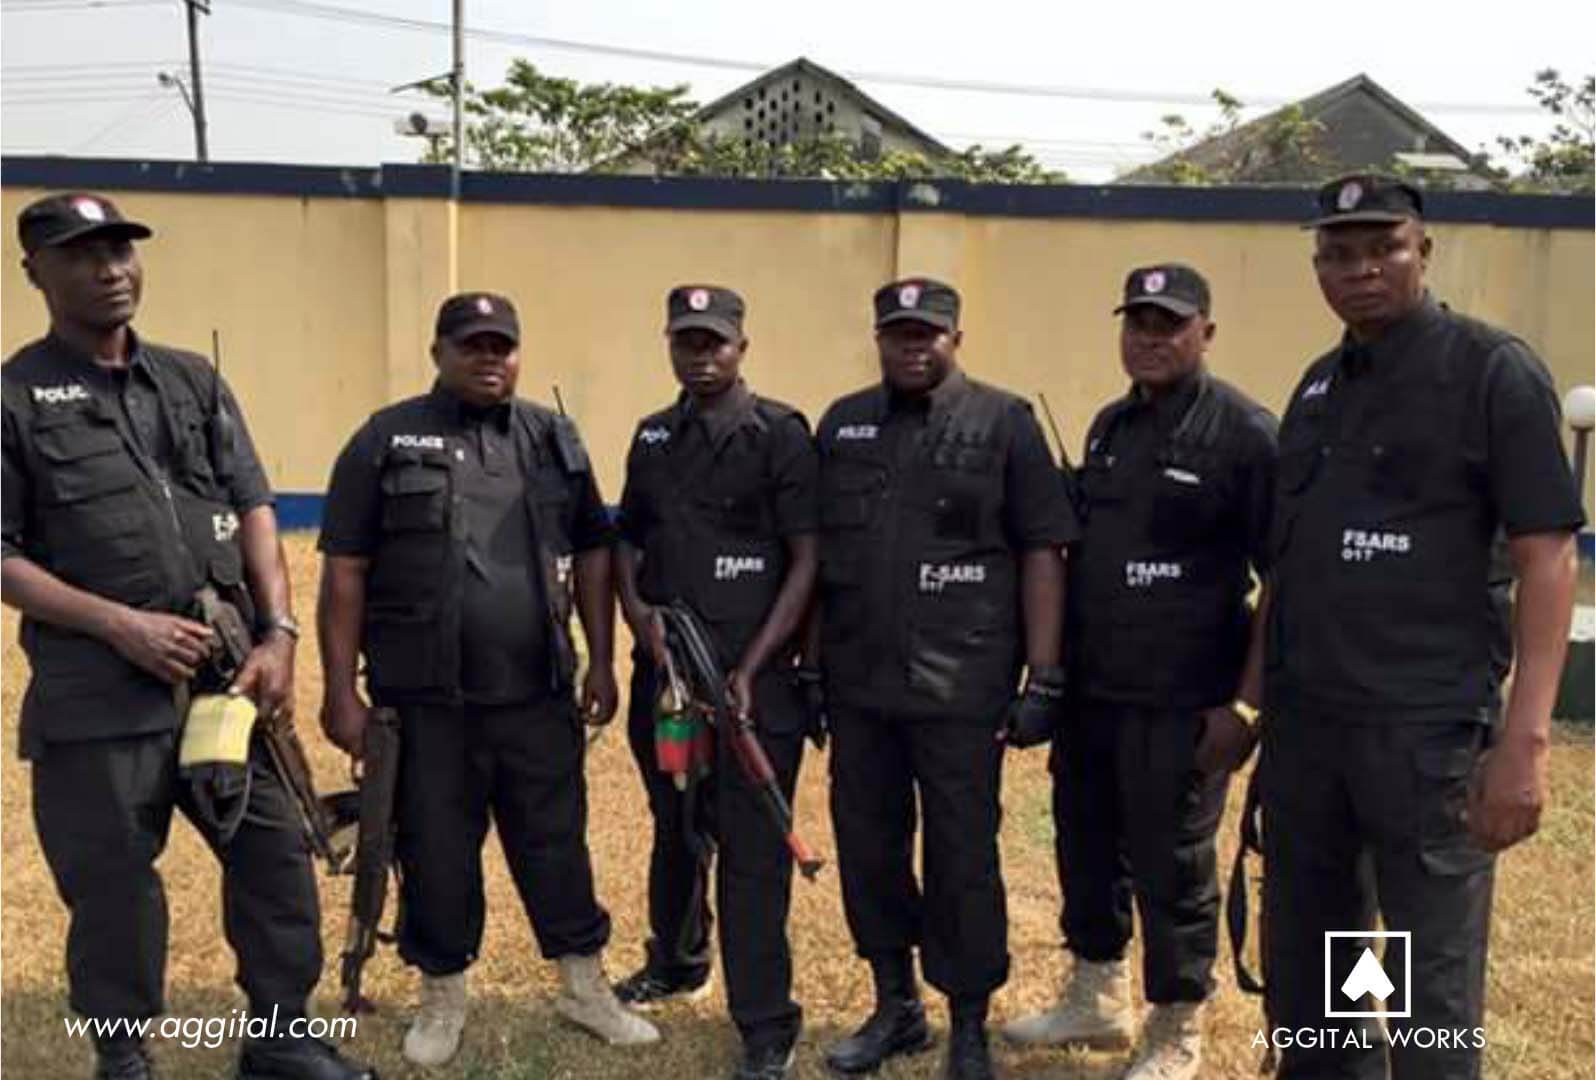 The Trending Brutality On Nigerian Young Men - SARS